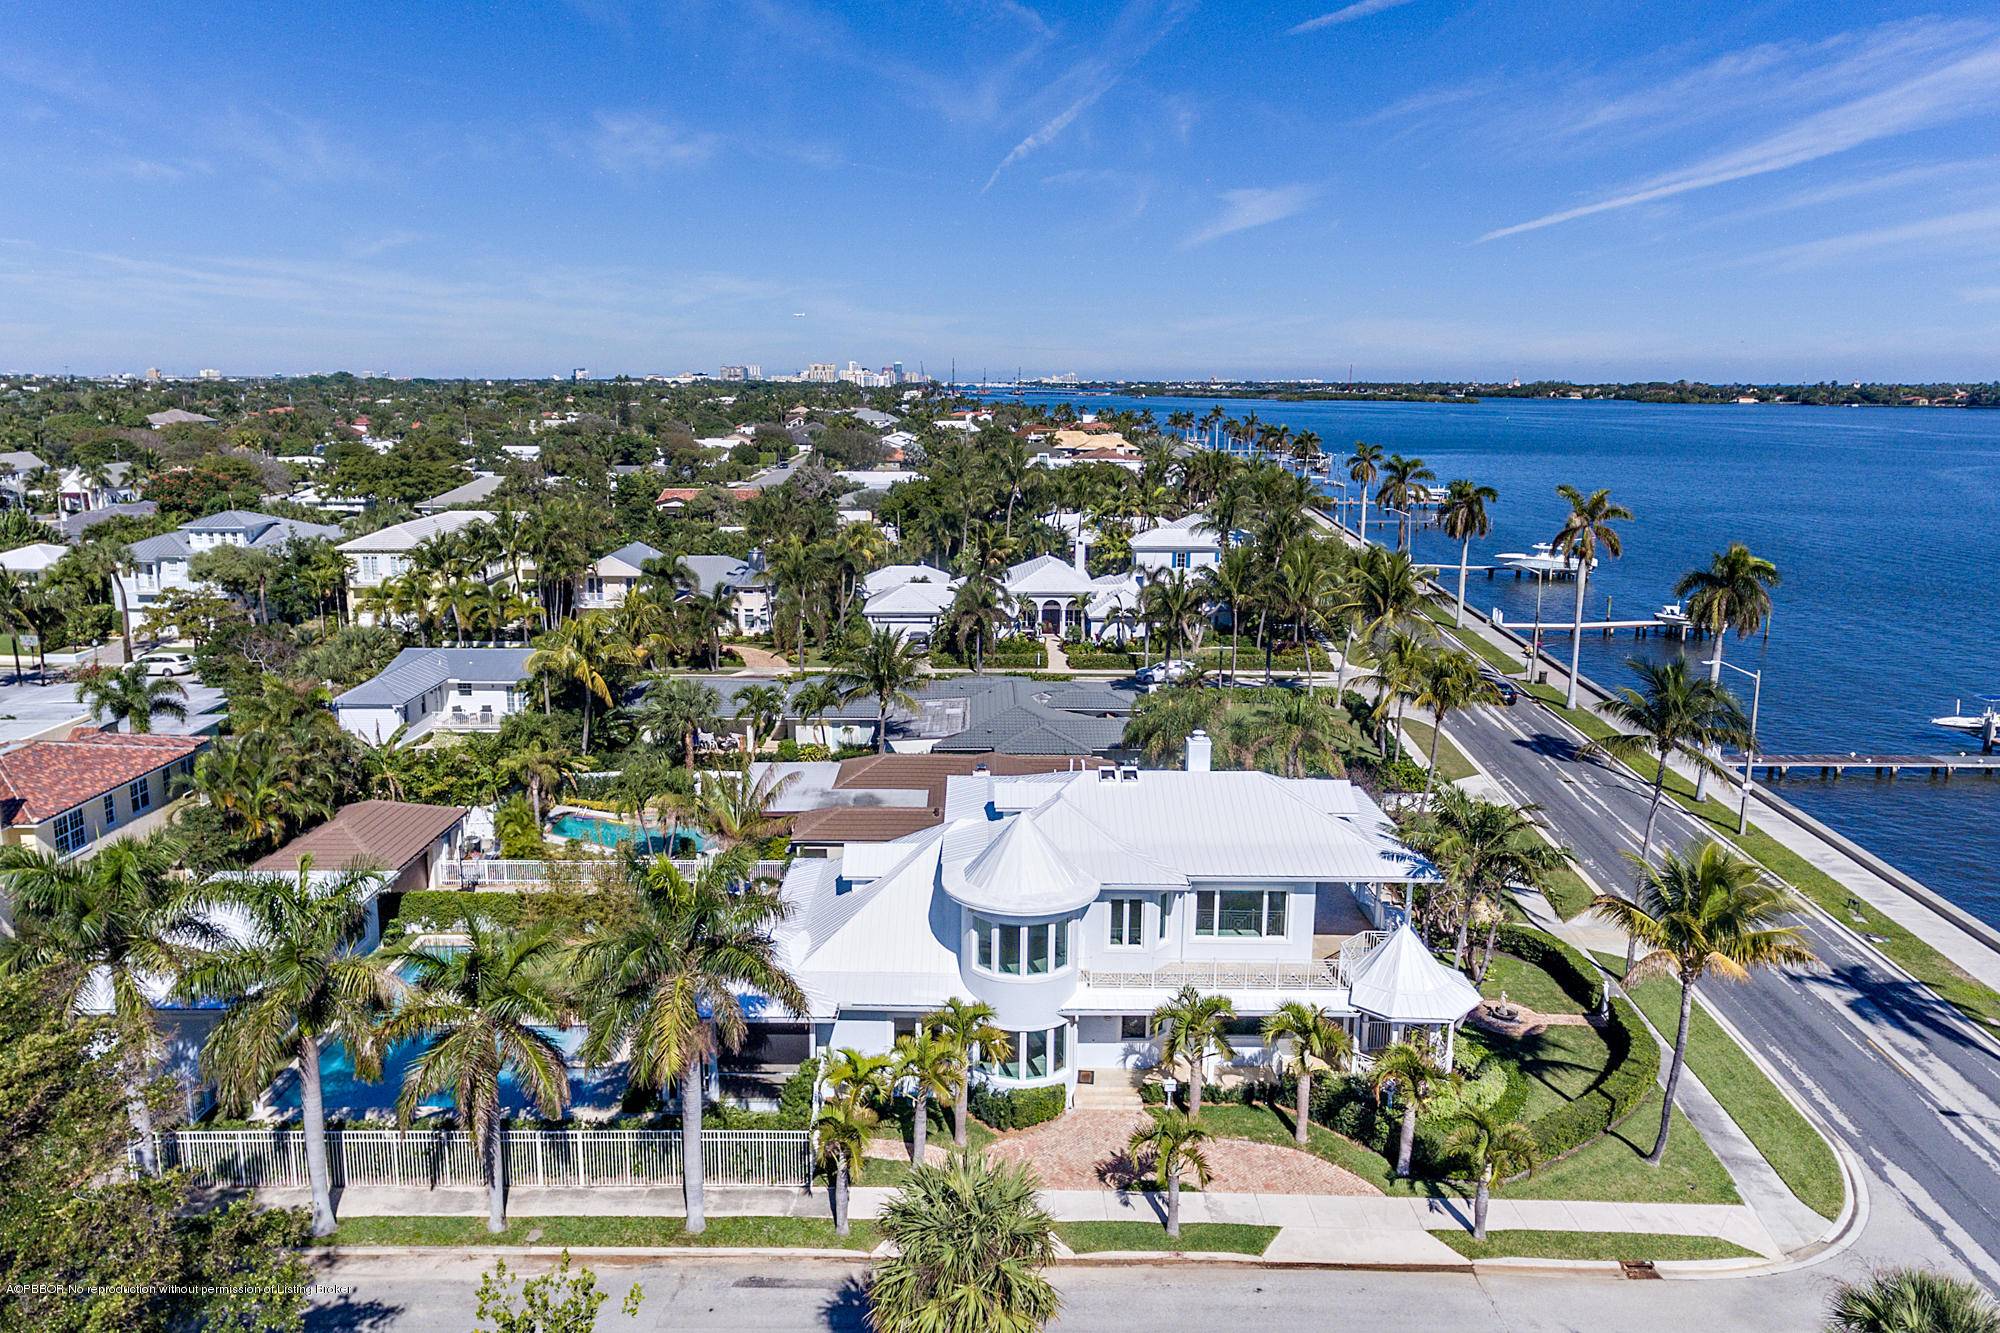 Stunning 4 bedroom 4. 5 bath waterfront home with breathtaking intracoastal views.